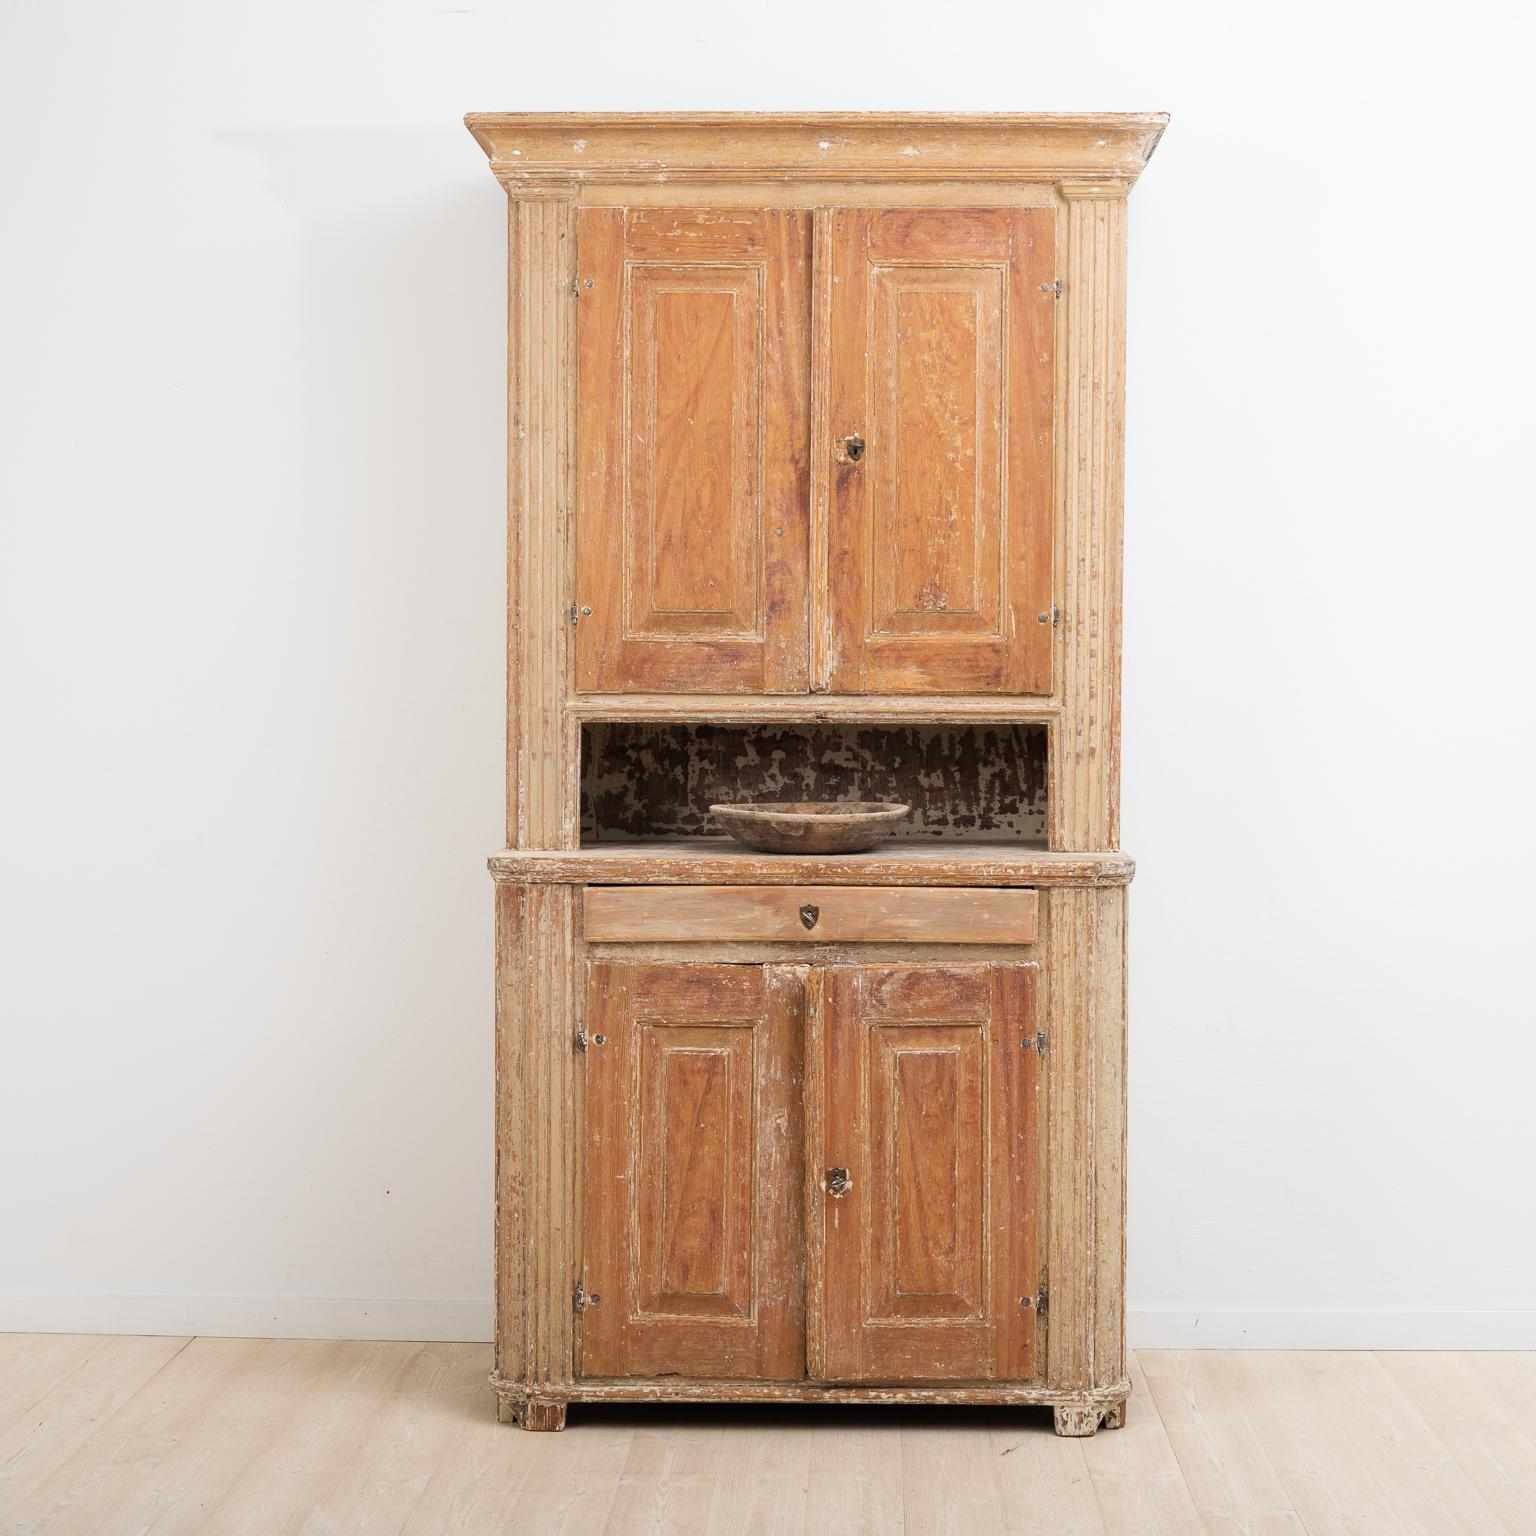 Late 18th century Swedish Gustavian cabinet. The lock and key are original and in working condition. The surface is scraped to original paint and has a rustic patina.

One part has been used as a bedside cabinet. As a compact living furniture it